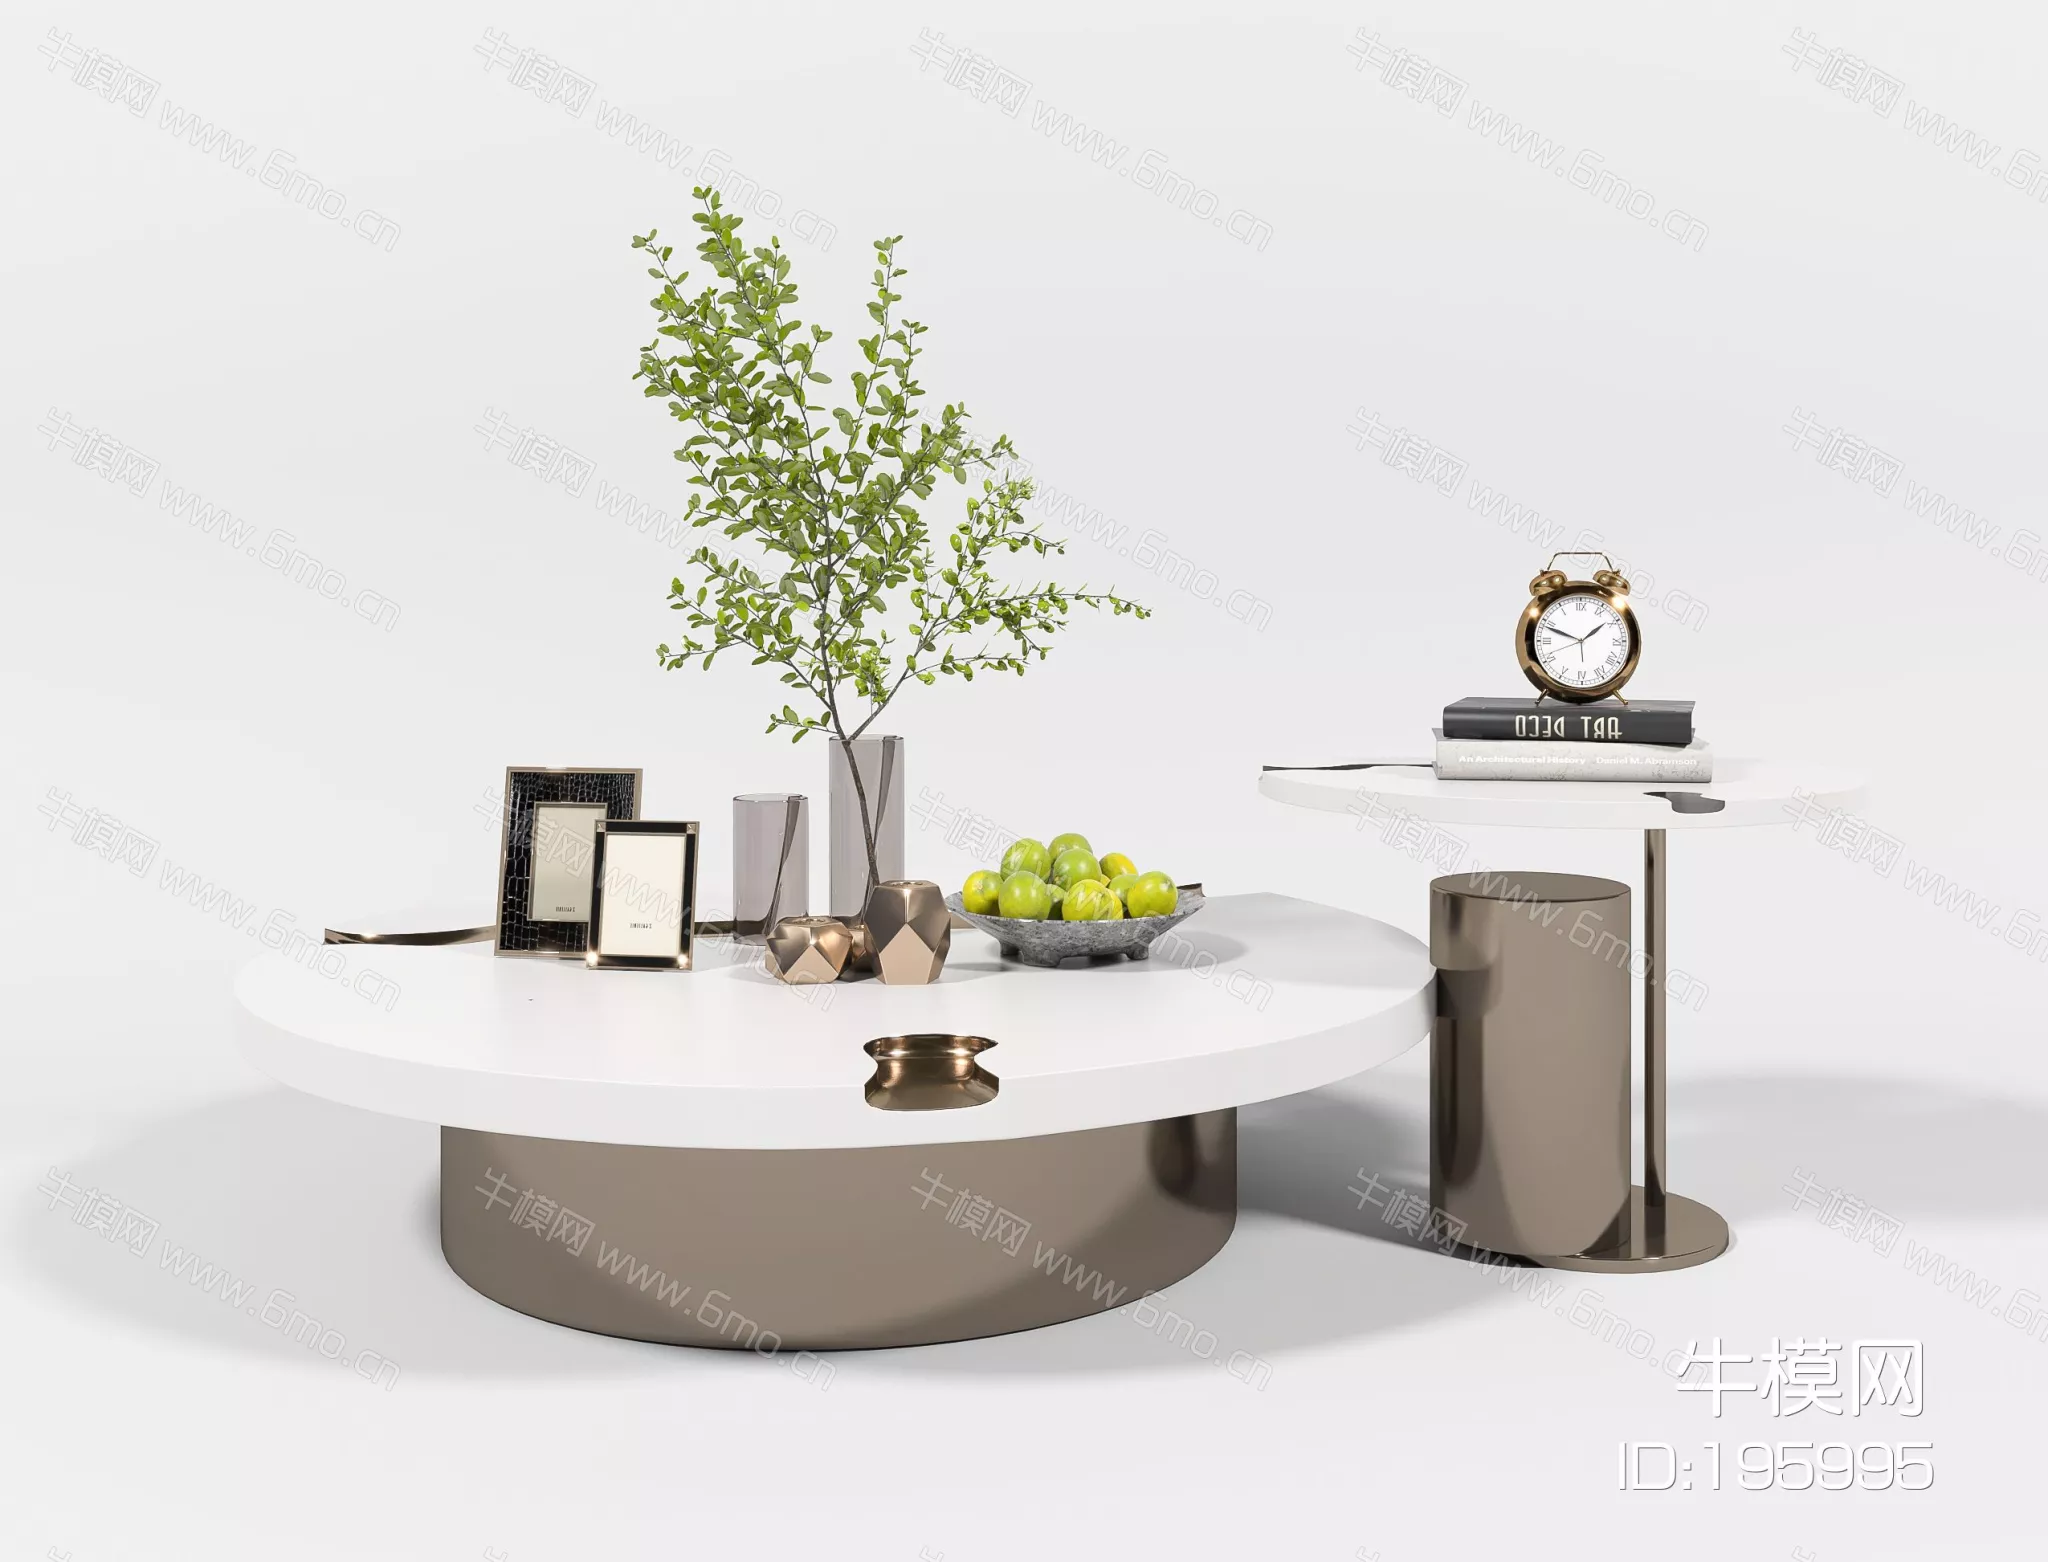 MODERN COFFEE TABLE - SKETCHUP 3D MODEL - ENSCAPE - 195995